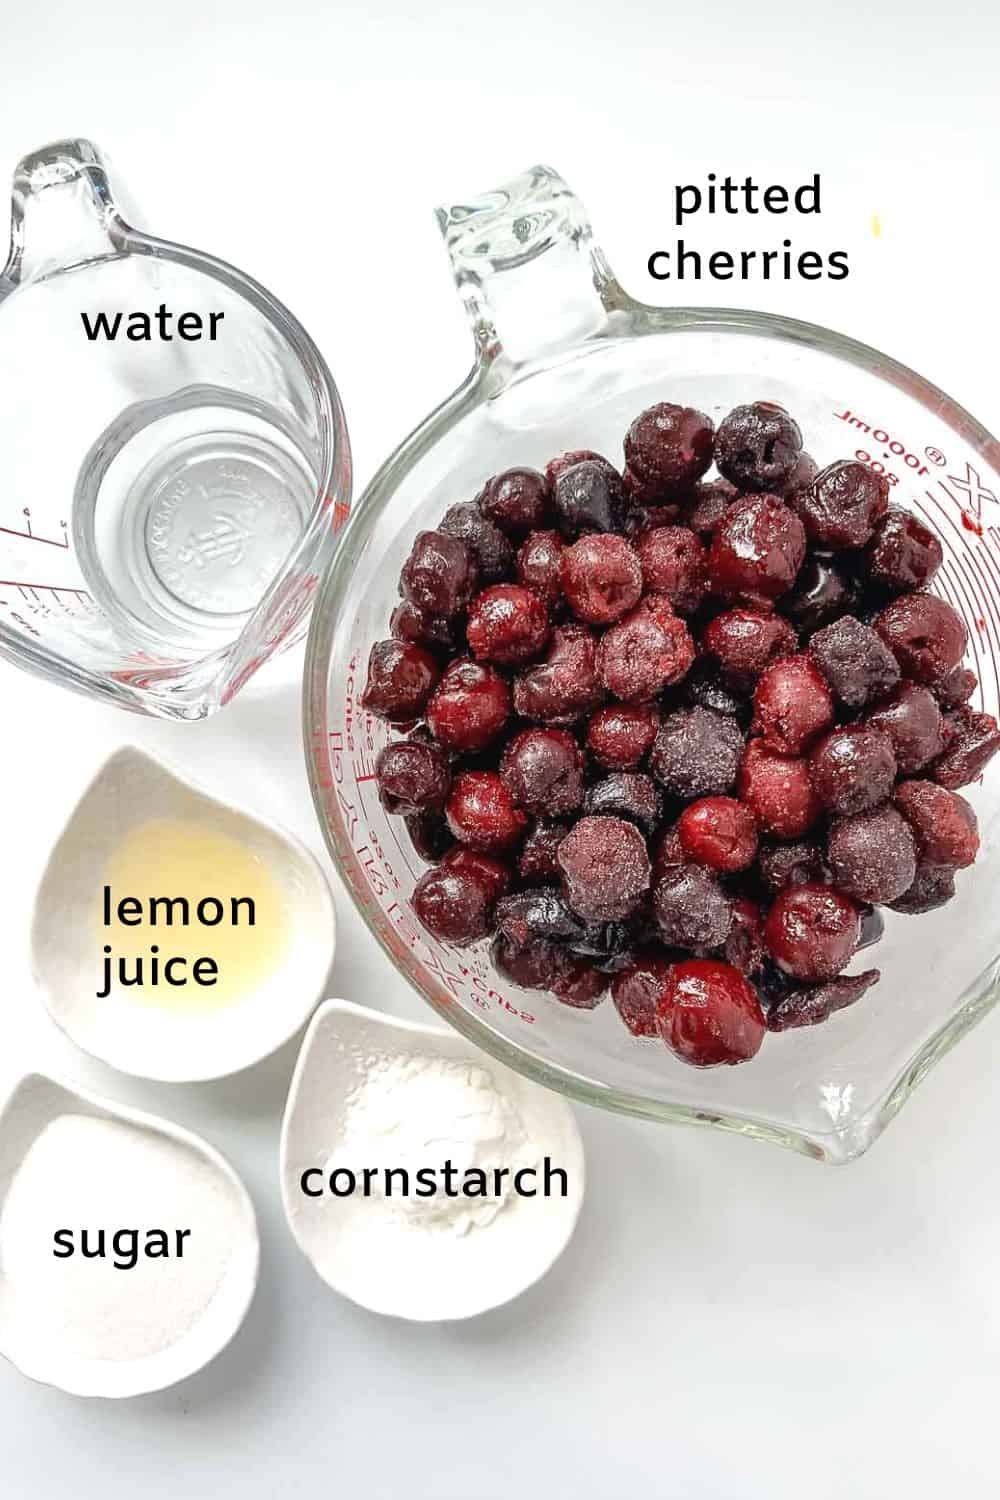 Ingredients to make a simple cherry sauce.